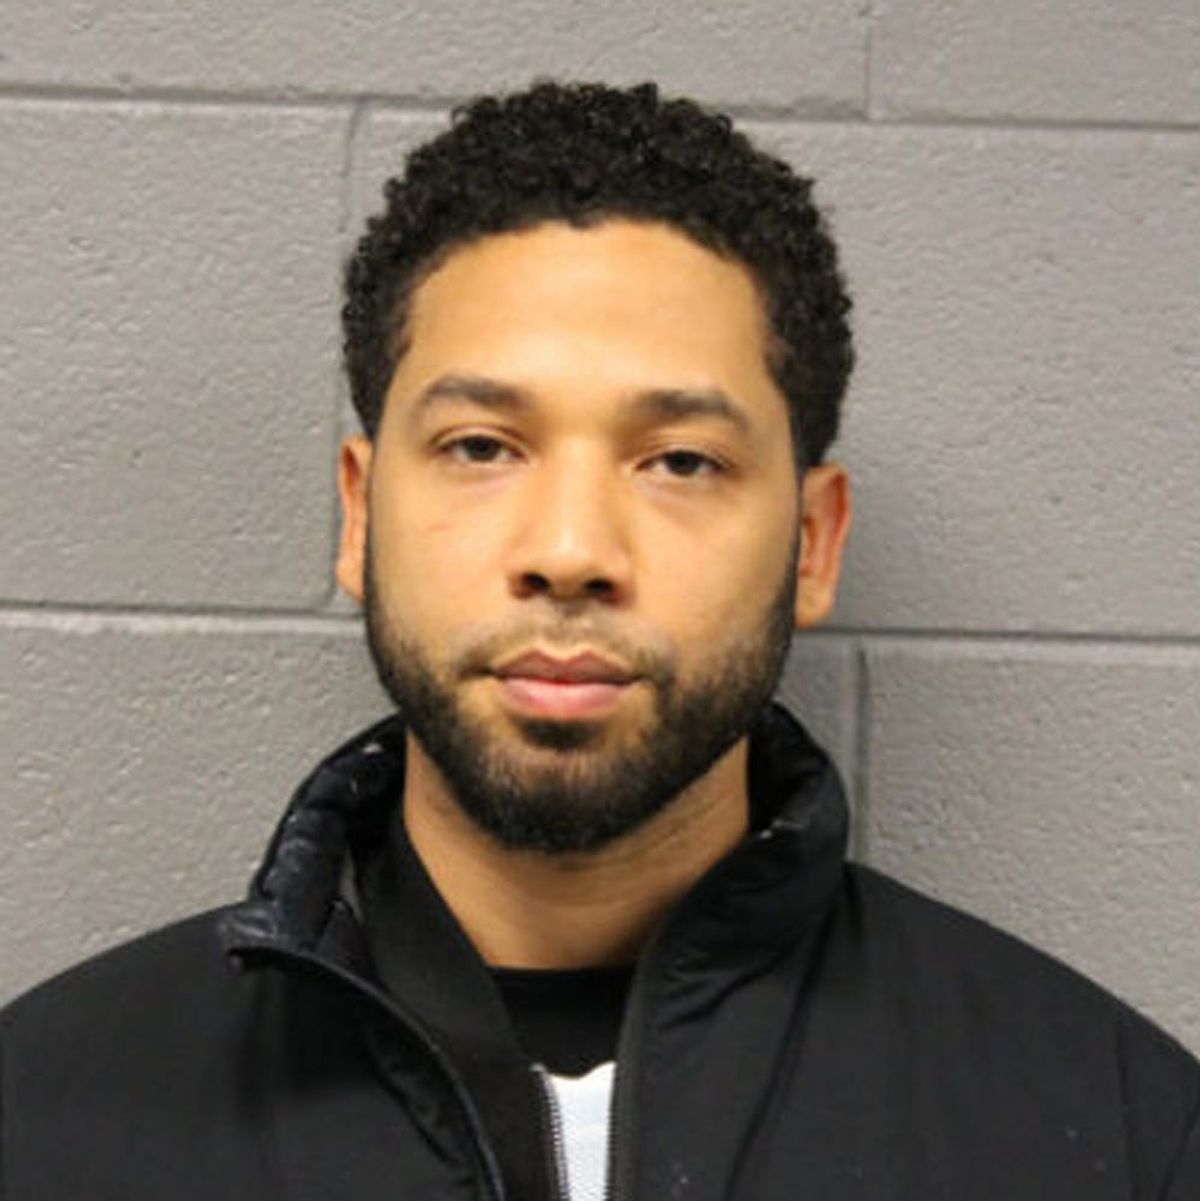 Jussie Smollett, the Chicago Police, and What We Mean by ‘Presumption of Innocence’